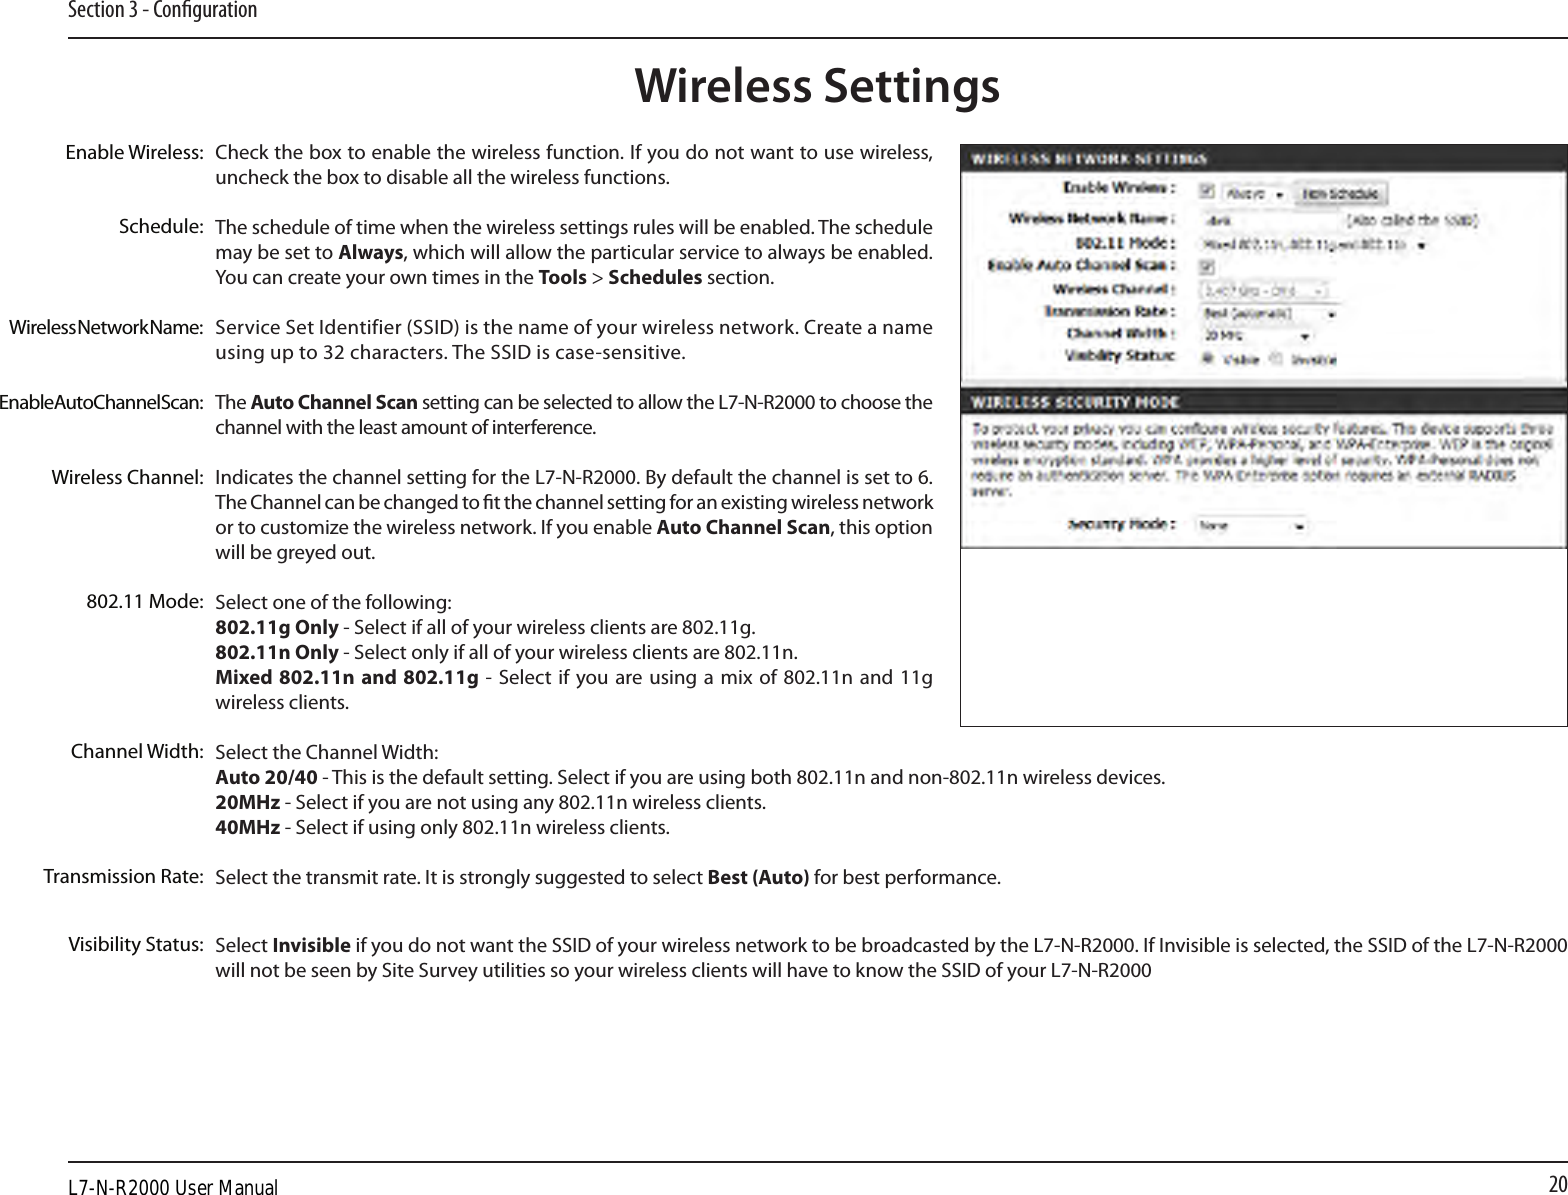 20Section 3 - CongurationCheck the box to enable the wireless function. If you do not want to use wireless, uncheck the box to disable all the wireless functions.The schedule of time when the wireless settings rules will be enabled. The schedule may be set to Always, which will allow the particular service to always be enabled. You can create your own times in the Tools &gt; Schedules section.Service Set Identifier (SSID) is the name of your wireless network. Create a name using up to 32 characters. The SSID is case-sensitive.The Auto Channel Scan setting can be selected to allow the L7-N-R2000 to choose the channel with the least amount of interference.Indicates the channel setting for the L7-N-R2000. By default the channel is set to 6. The Channel can be changed to t the channel setting for an existing wireless network or to customize the wireless network. If you enable Auto Channel Scan, this option will be greyed out.Select one of the following:802.11g Only - Select if all of your wireless clients are 802.11g.802.11n Only - Select only if all of your wireless clients are 802.11n.Mixed 802.11n and 802.11g -  Select if  you are  using a mix  of  802.11n and 11g wireless clients.Select the Channel Width:Auto 20/40 - This is the default setting. Select if you are using both 802.11n and non-802.11n wireless devices.20MHz - Select if you are not using any 802.11n wireless clients.40MHz - Select if using only 802.11n wireless clients.Select the transmit rate. It is strongly suggested to select Best (Auto) for best performance.Select Invisible if you do not want the SSID of your wireless network to be broadcasted by the L7-N-R2000. If Invisible is selected, the SSID of the L7-N-R2000 will not be seen by Site Survey utilities so your wireless clients will have to know the SSID of your L7-N-R2000Enable Wireless:Enable Auto Channel Scan:Wireless SettingsWireless Network Name:Wireless Channel:802.11 Mode:Channel Width:Transmission Rate:Visibility Status:Schedule:L7-N-R2000 User Manual